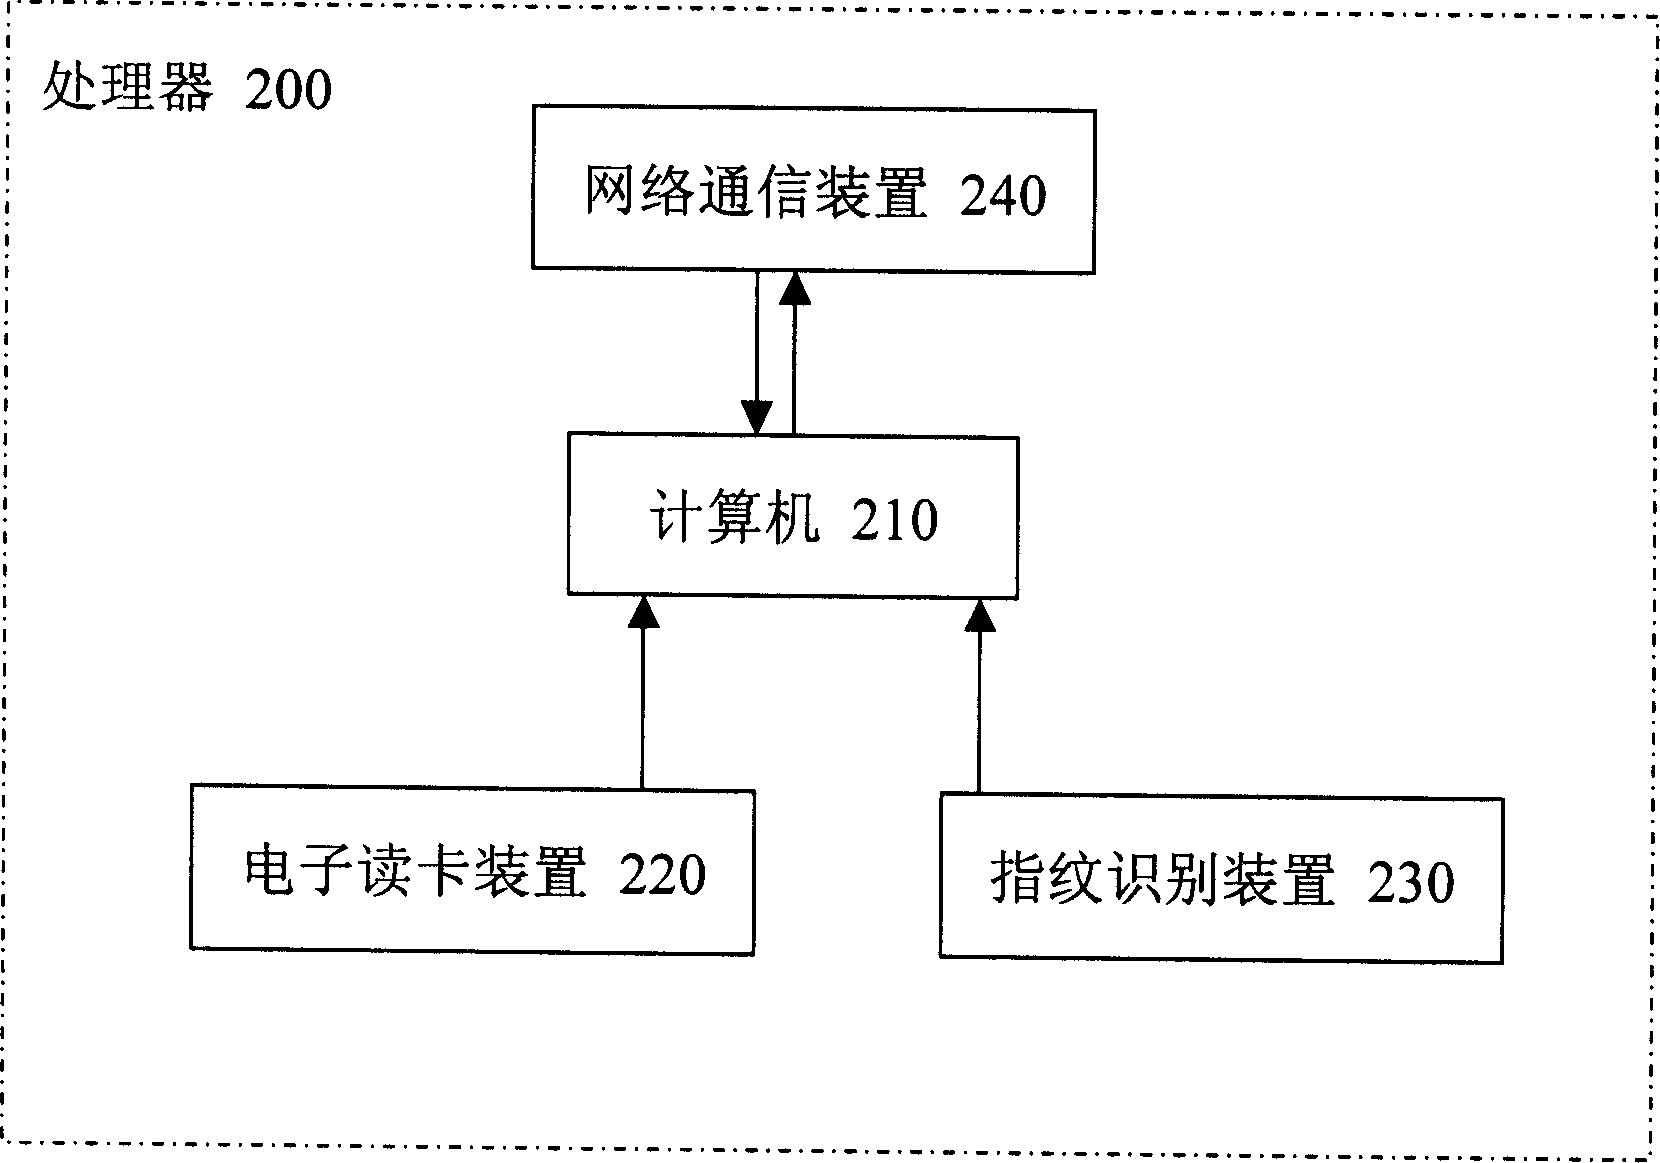 A bank card and method for making transaction with bank card and system thereof